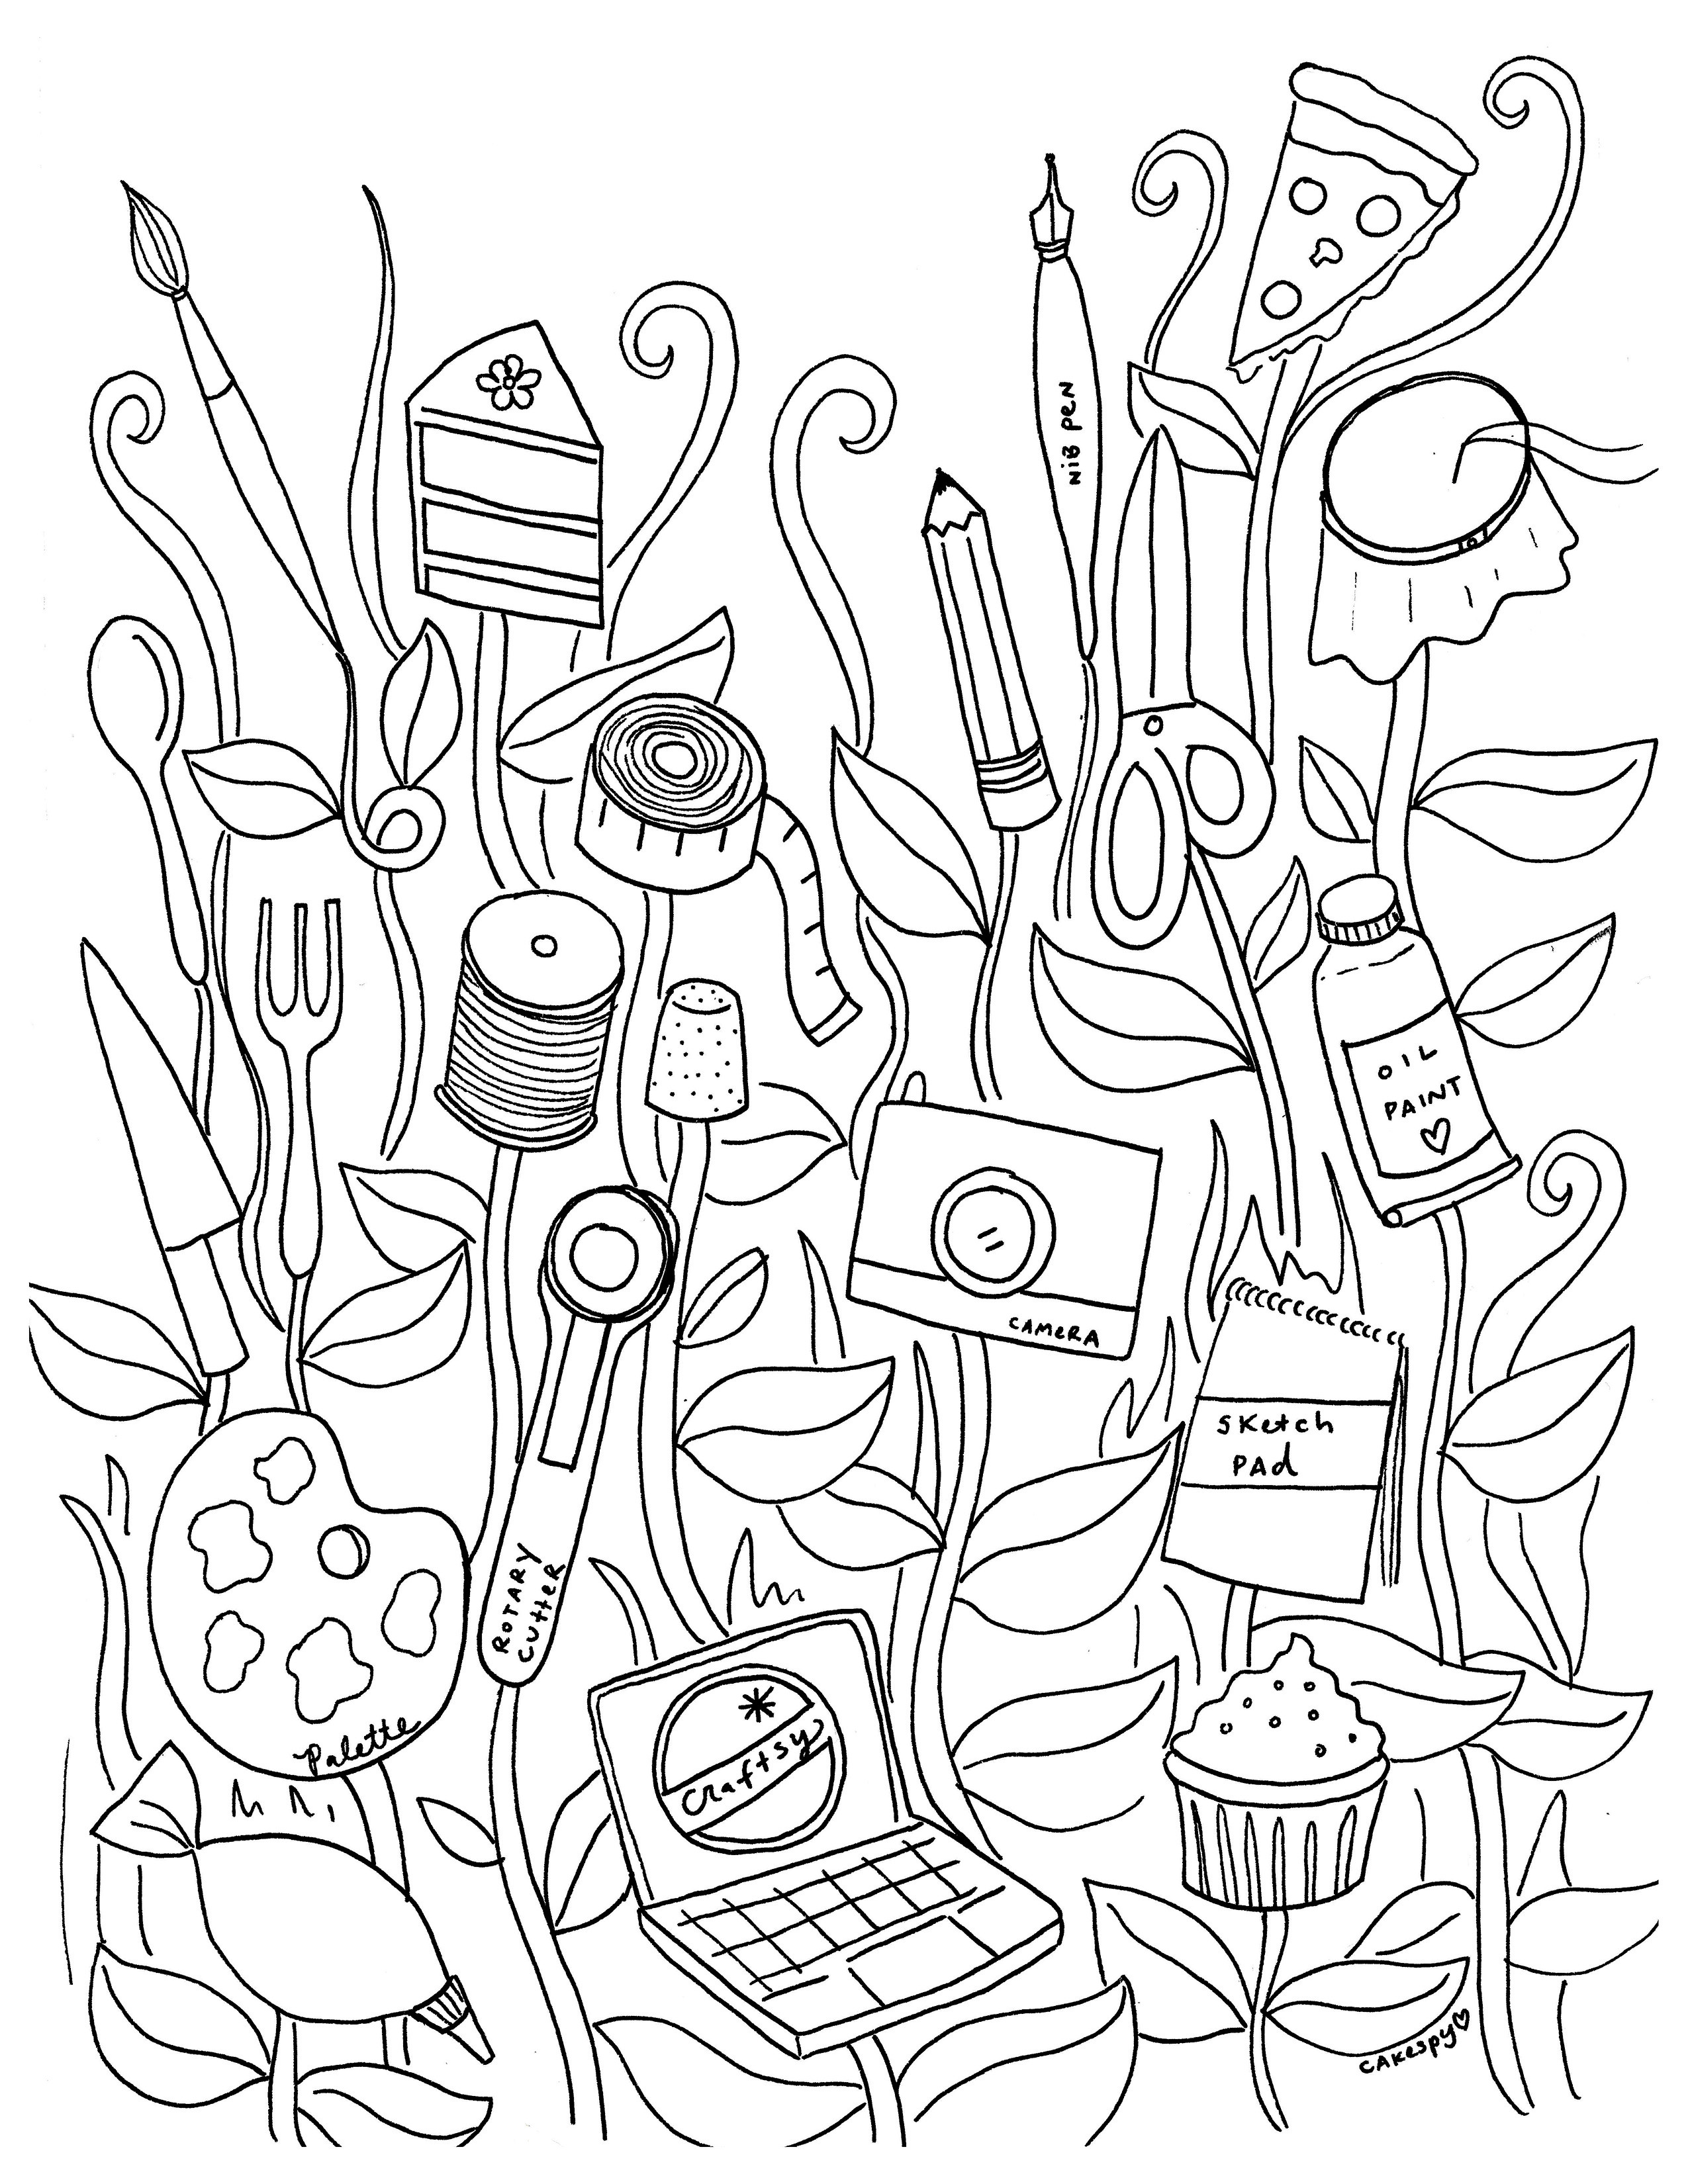 Adult Adult Coloring Books
 Free Coloring Book Pages for Adults